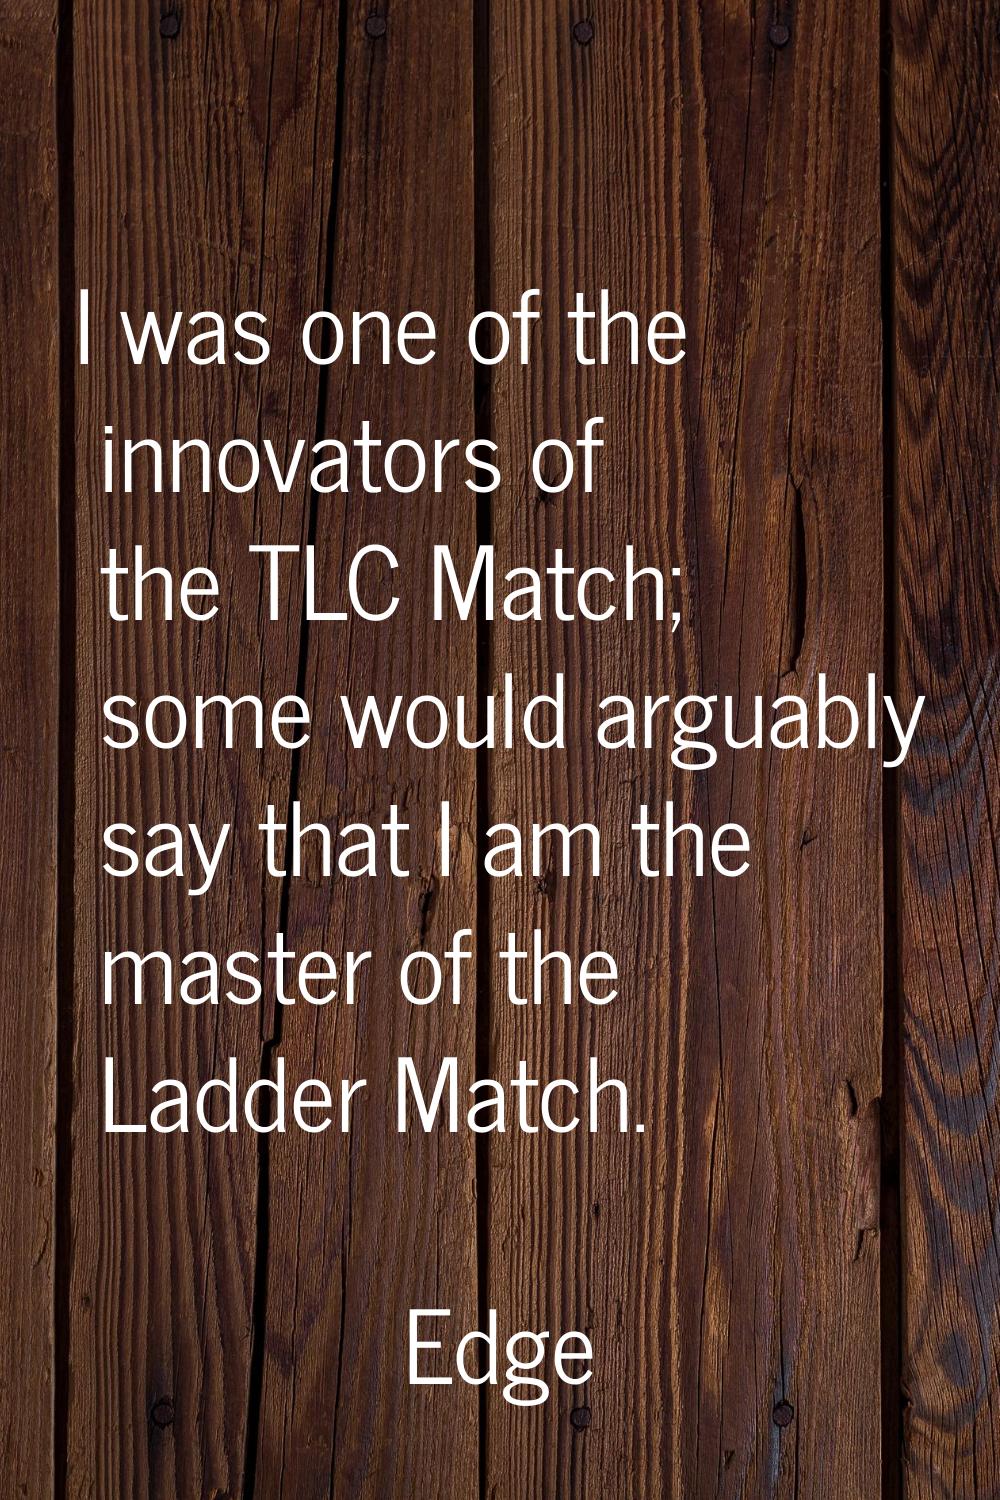 I was one of the innovators of the TLC Match; some would arguably say that I am the master of the L